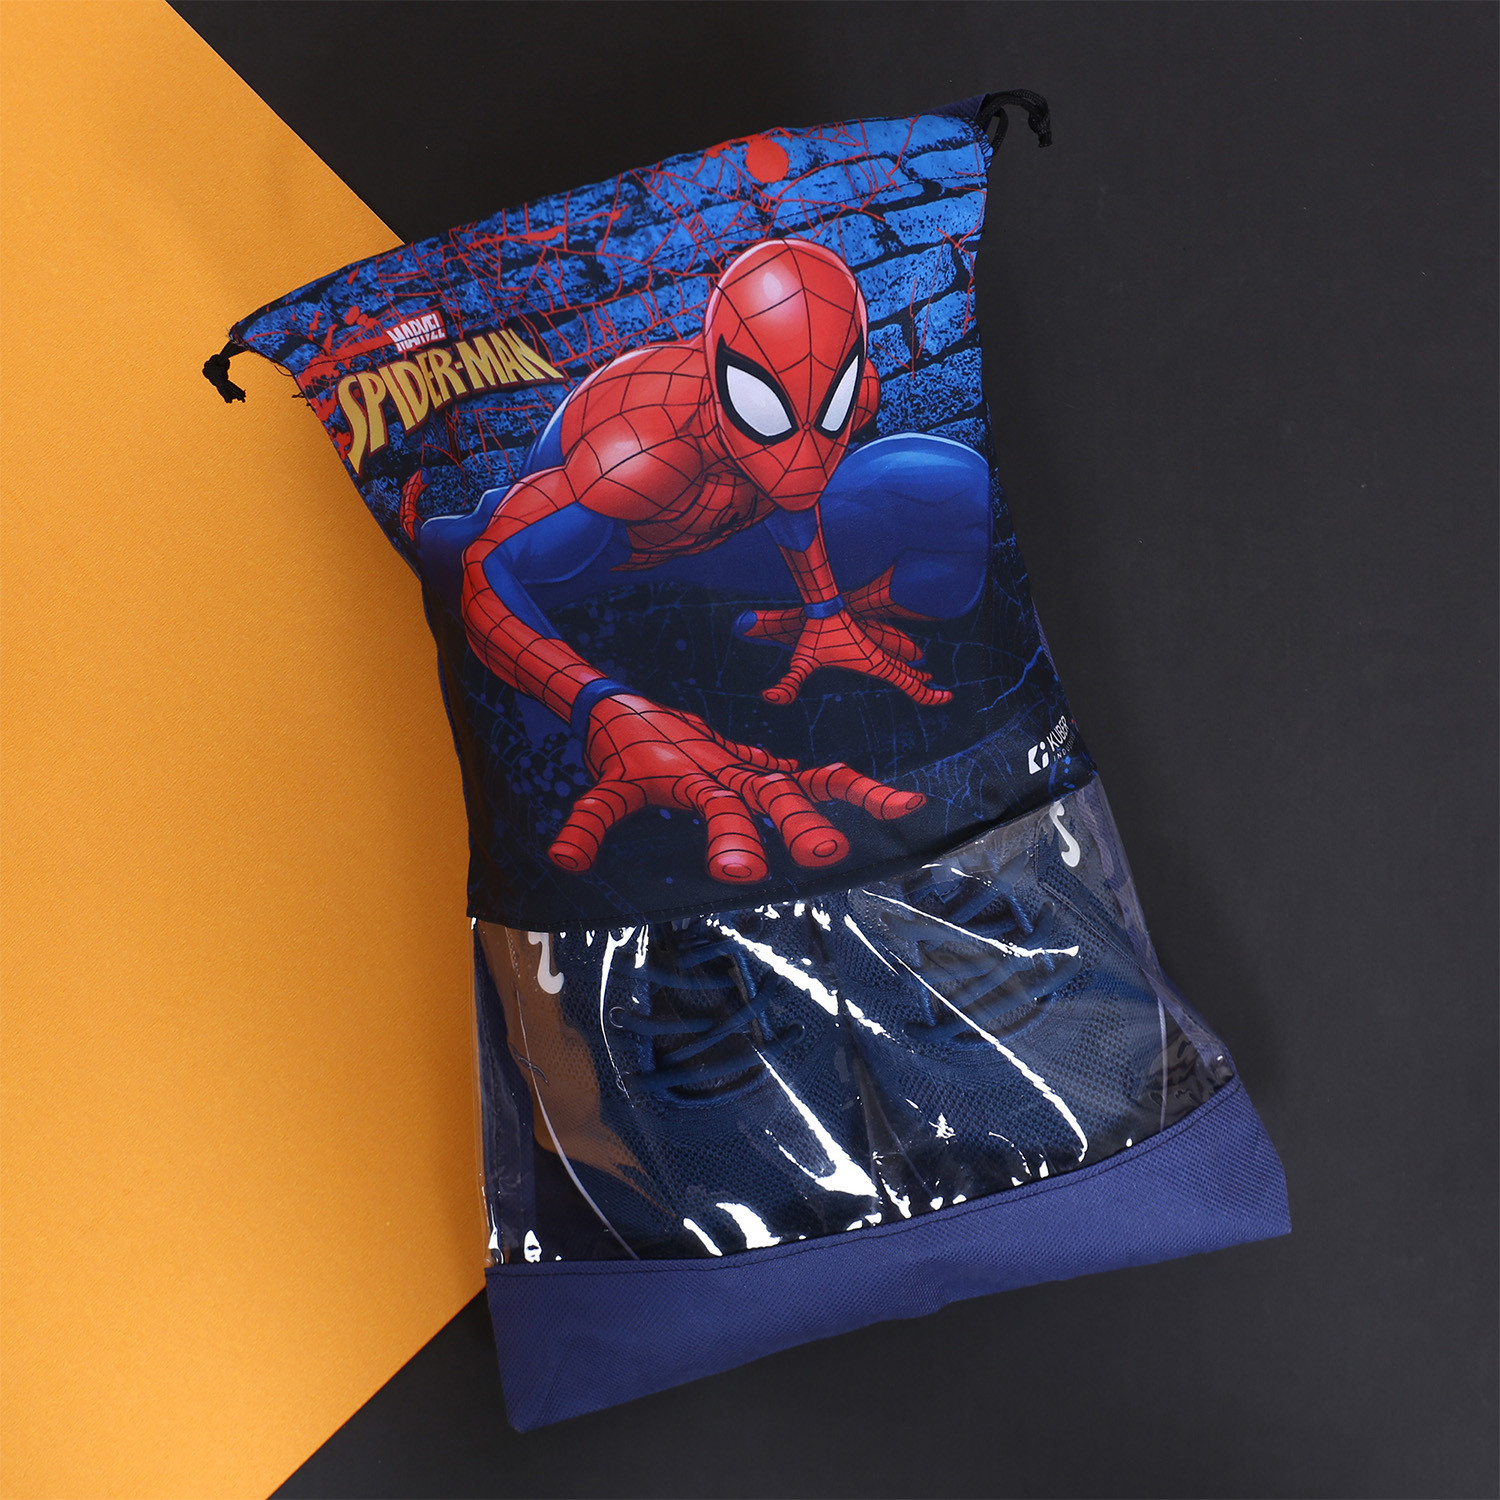 Kuber Industries Marvel Spider Man Print Shoe Cover| Non-Woven Dust Proof Shoe Bag|Drawstring Sneakers Organizer & Transparent Front,(Navy Blue)